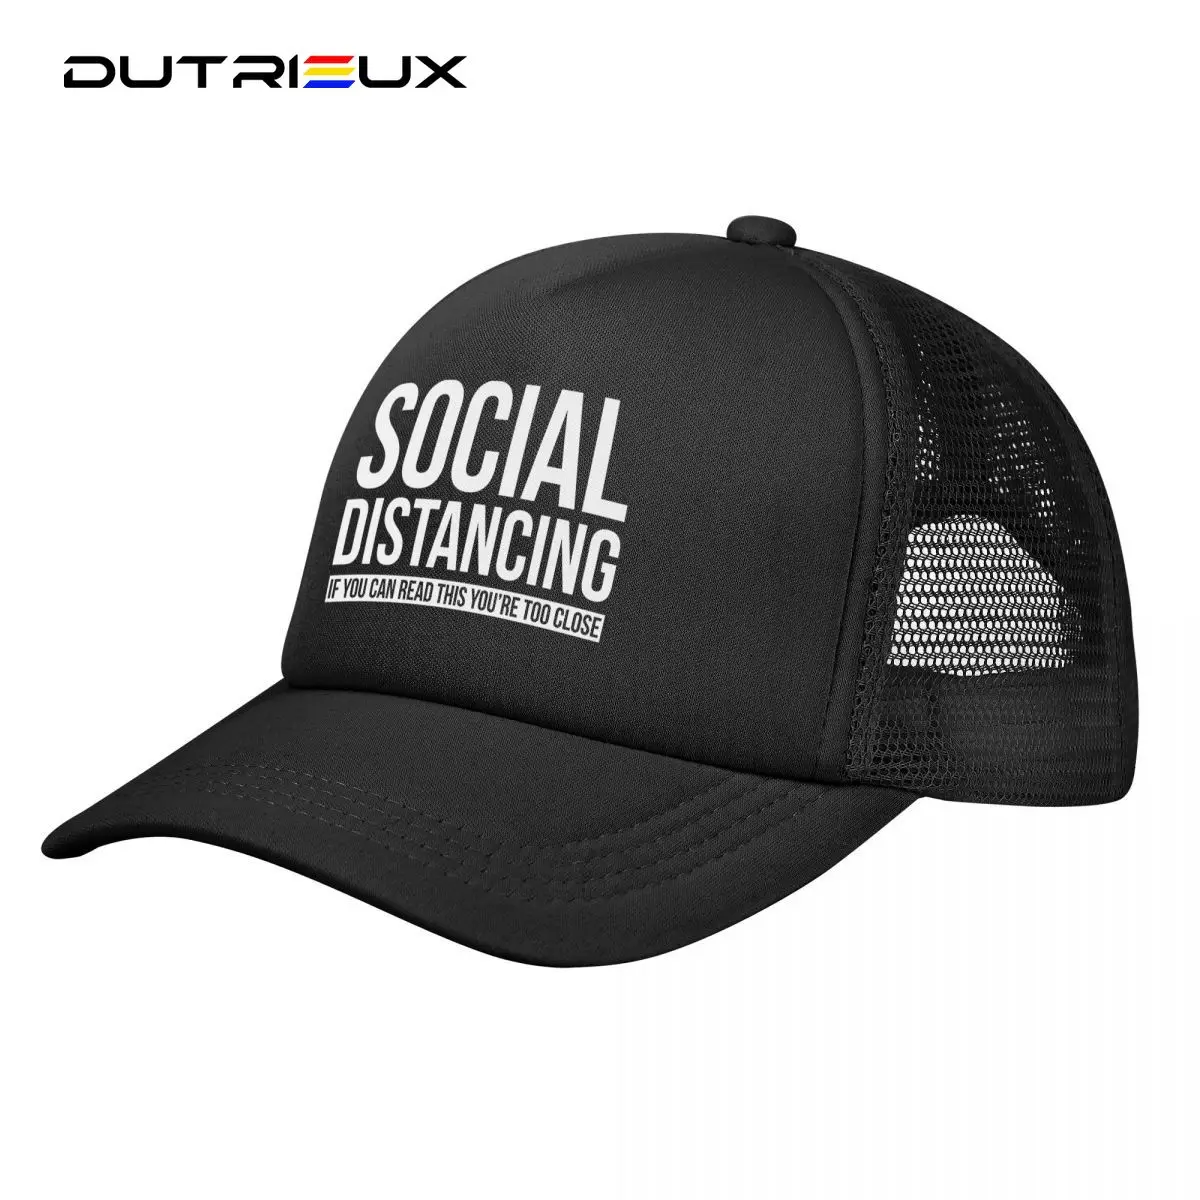 

SOCIAL DISTANCING IF YOU CAN-READ THIS YOU RE TOO CLOSE Baseball Cap for Men Women Snapback Adjustable Unisex Fishing Mesh Hats